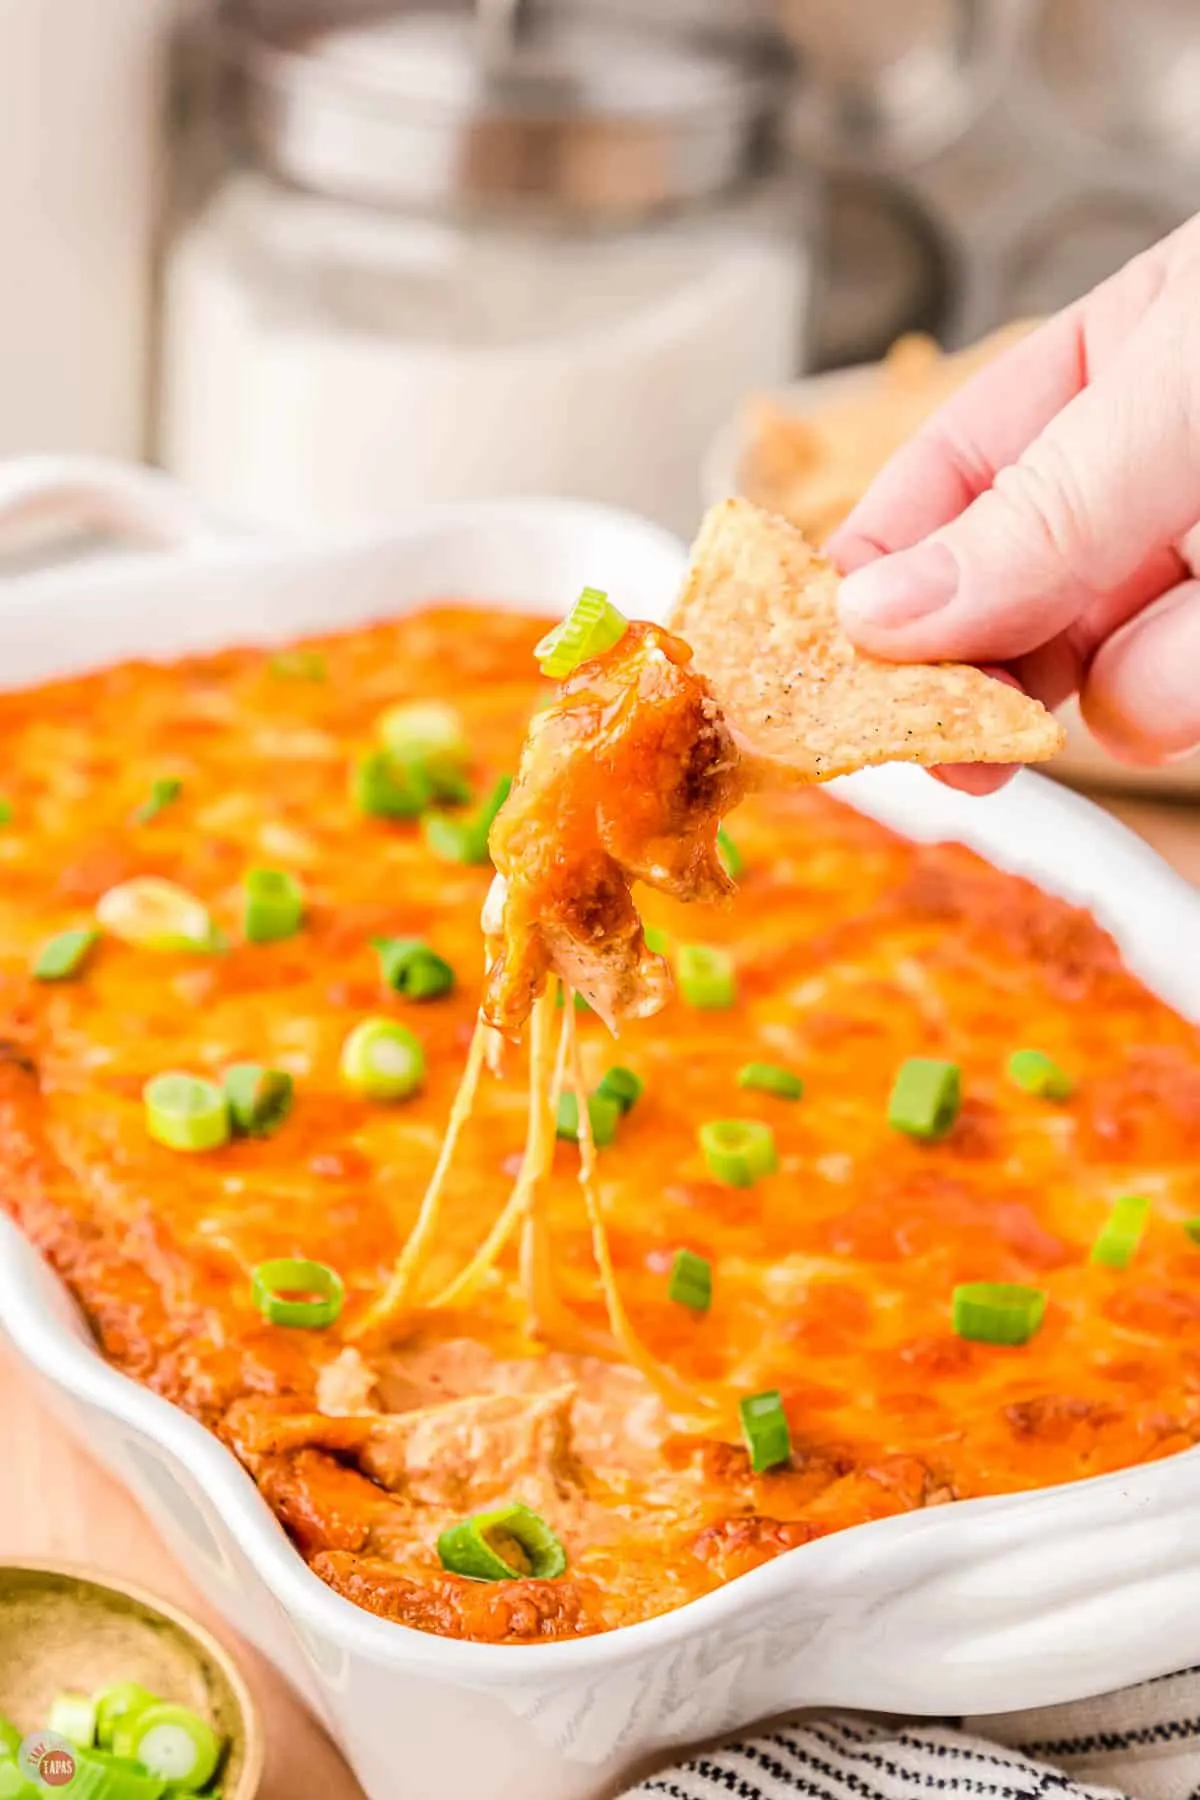 chip dipping in casserole dish